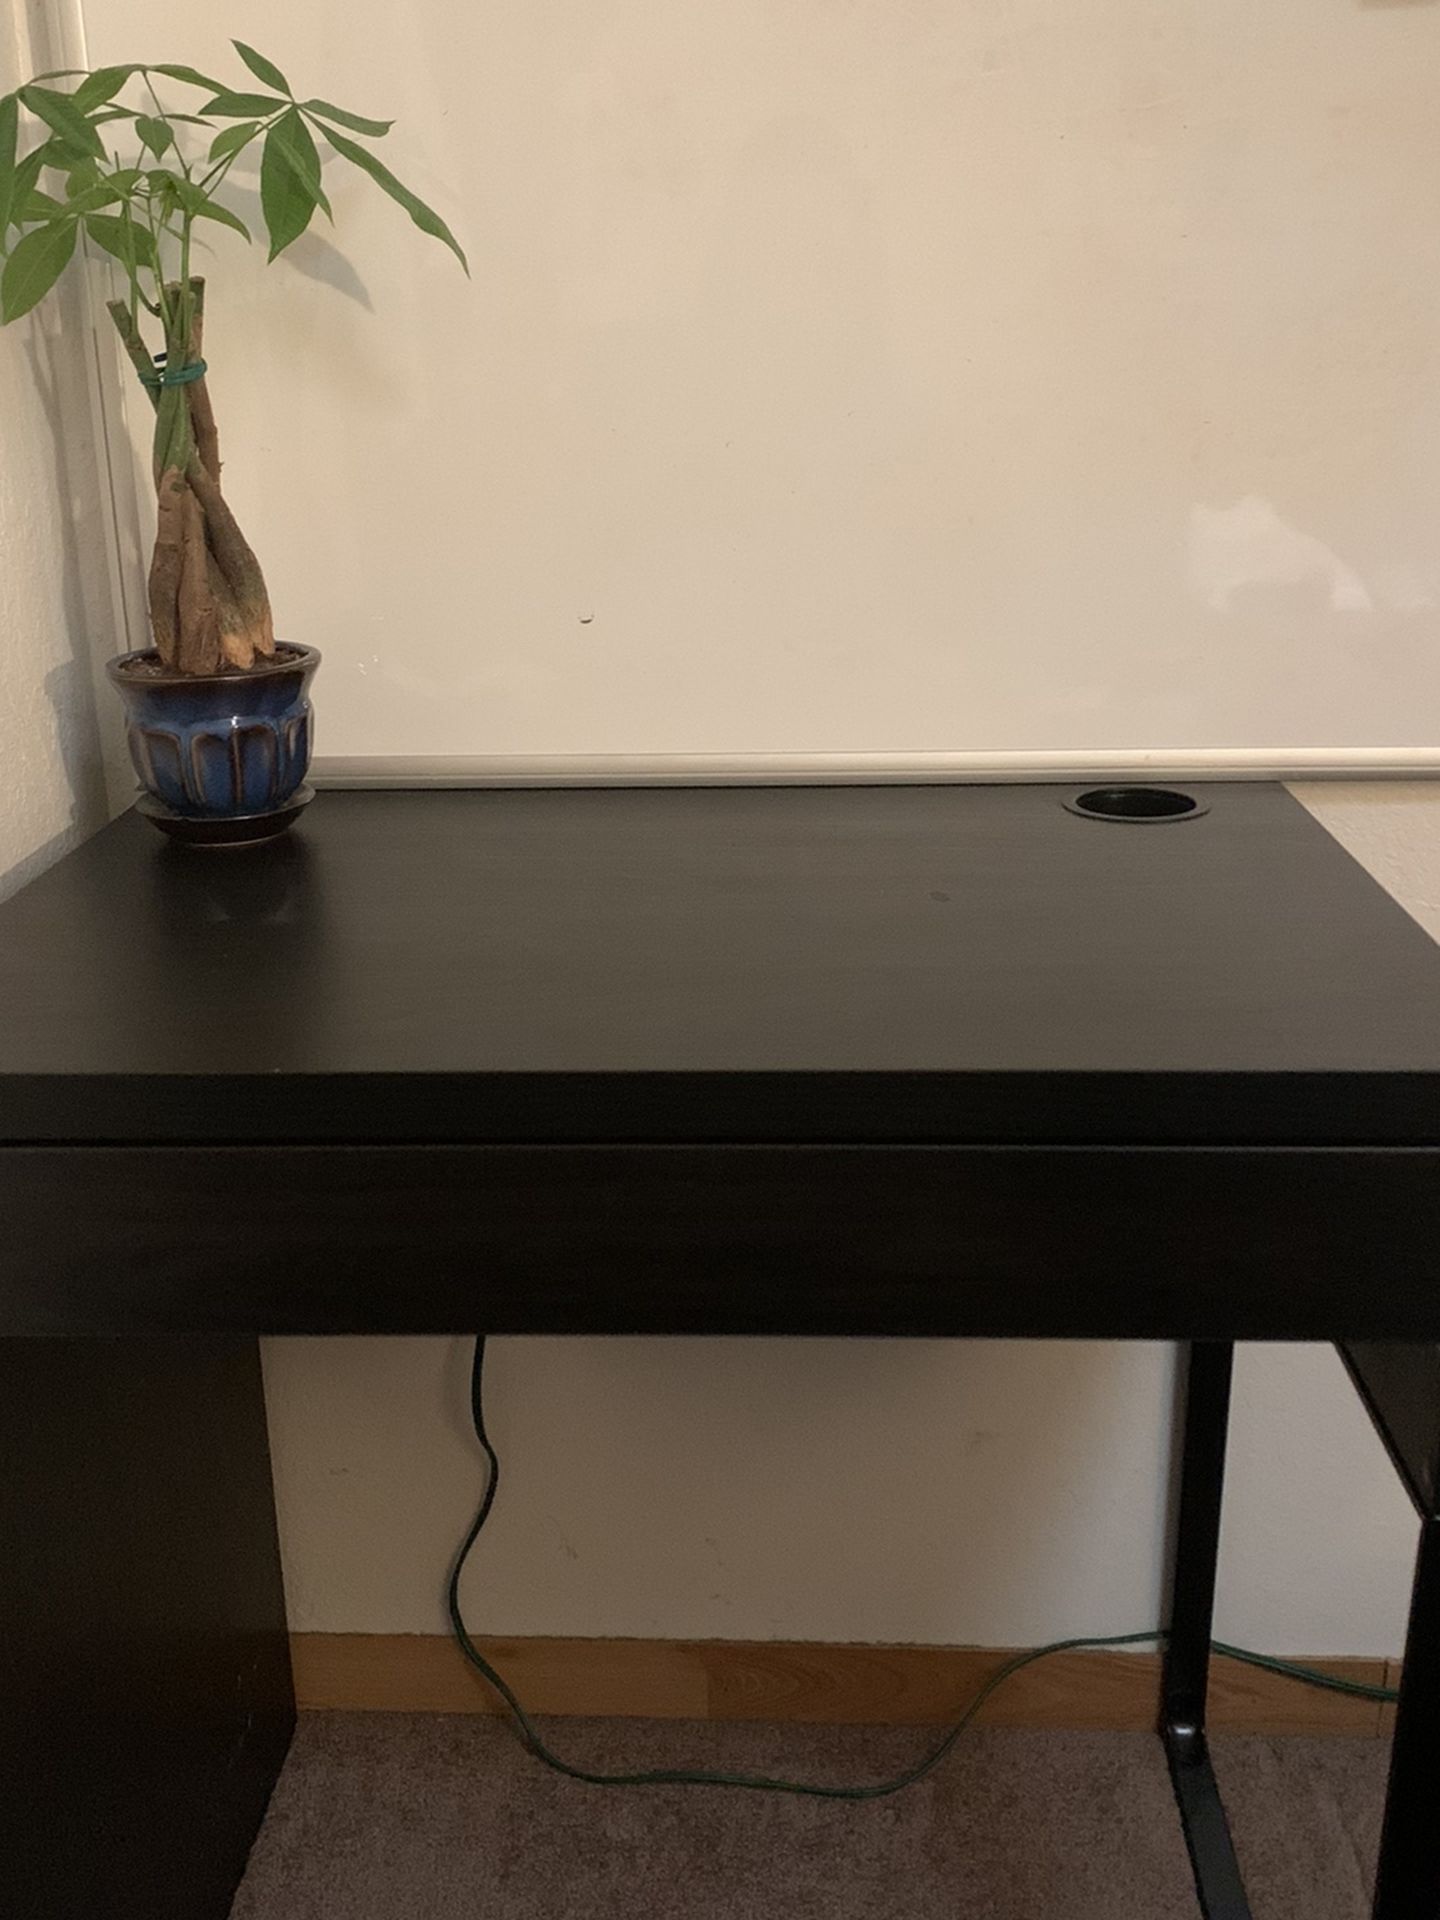 IKEA Desk $40 Fairly New Assembled Ready To Use